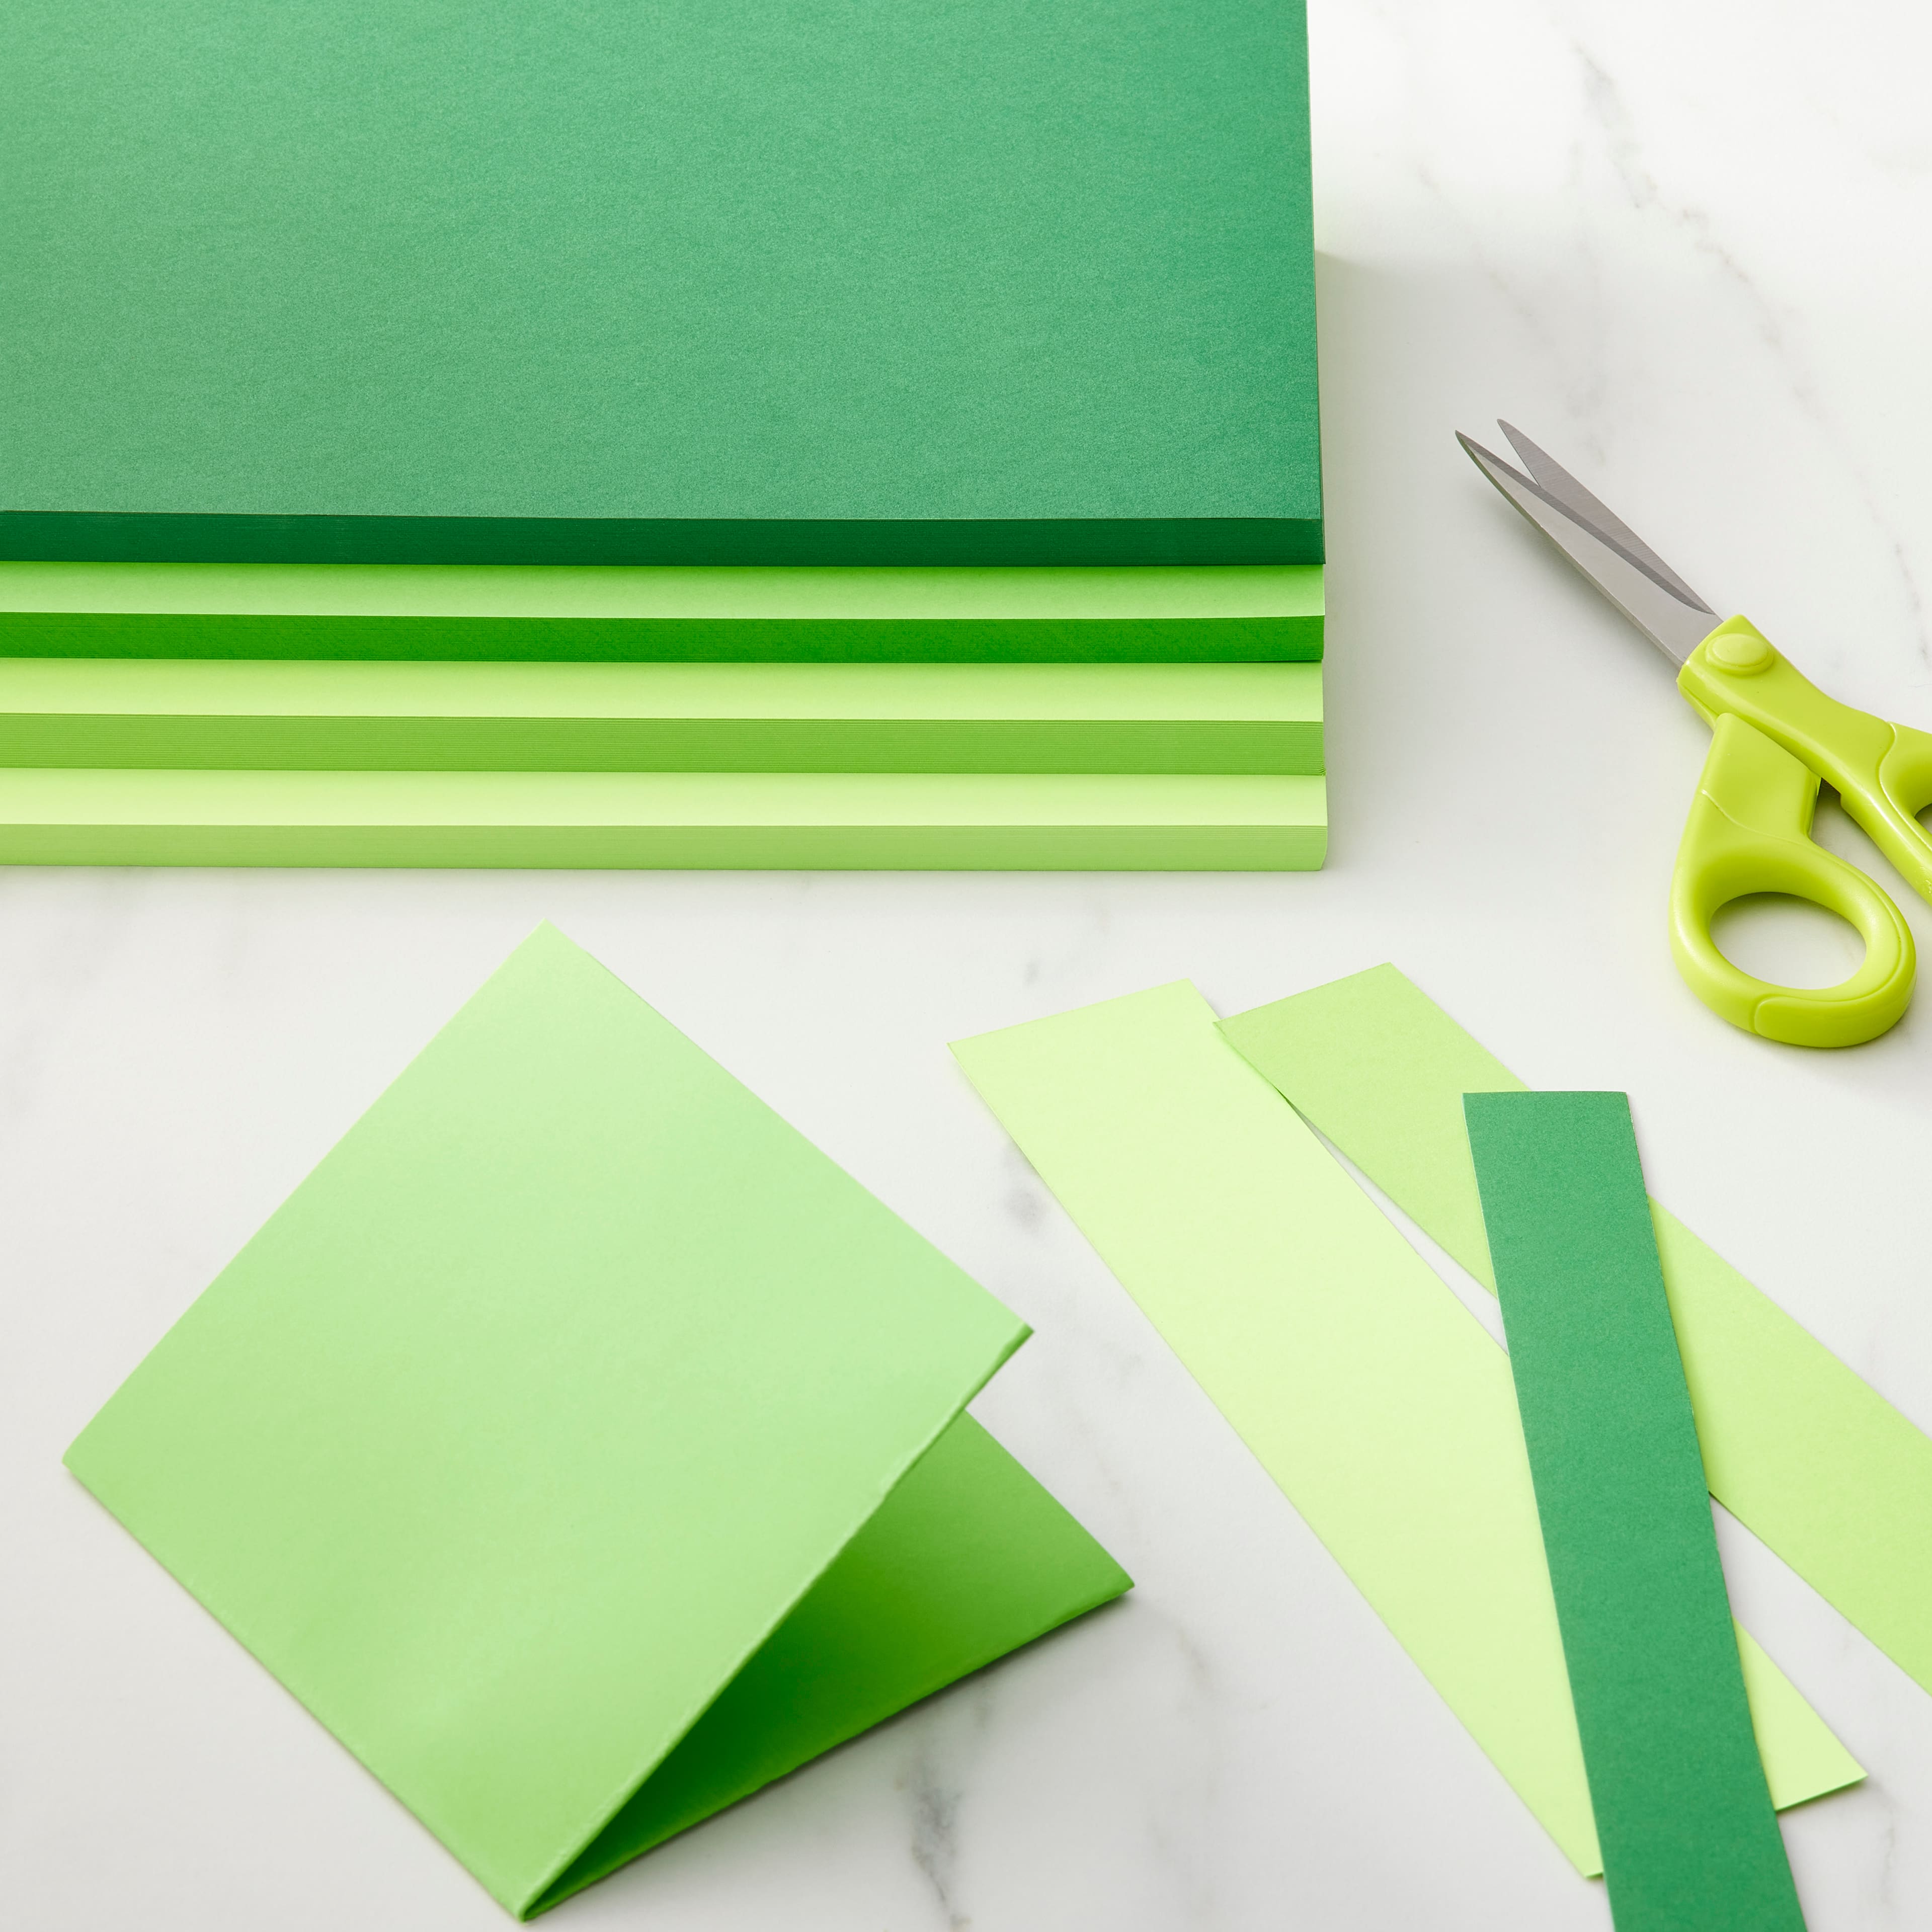 25Sheets Green Cardstock Paper, 8.5 x 11 Card stock for Cricut, Thick  Construction Paper for Card Making, Scrapbooking, Craft 90 lb / 250 gsm